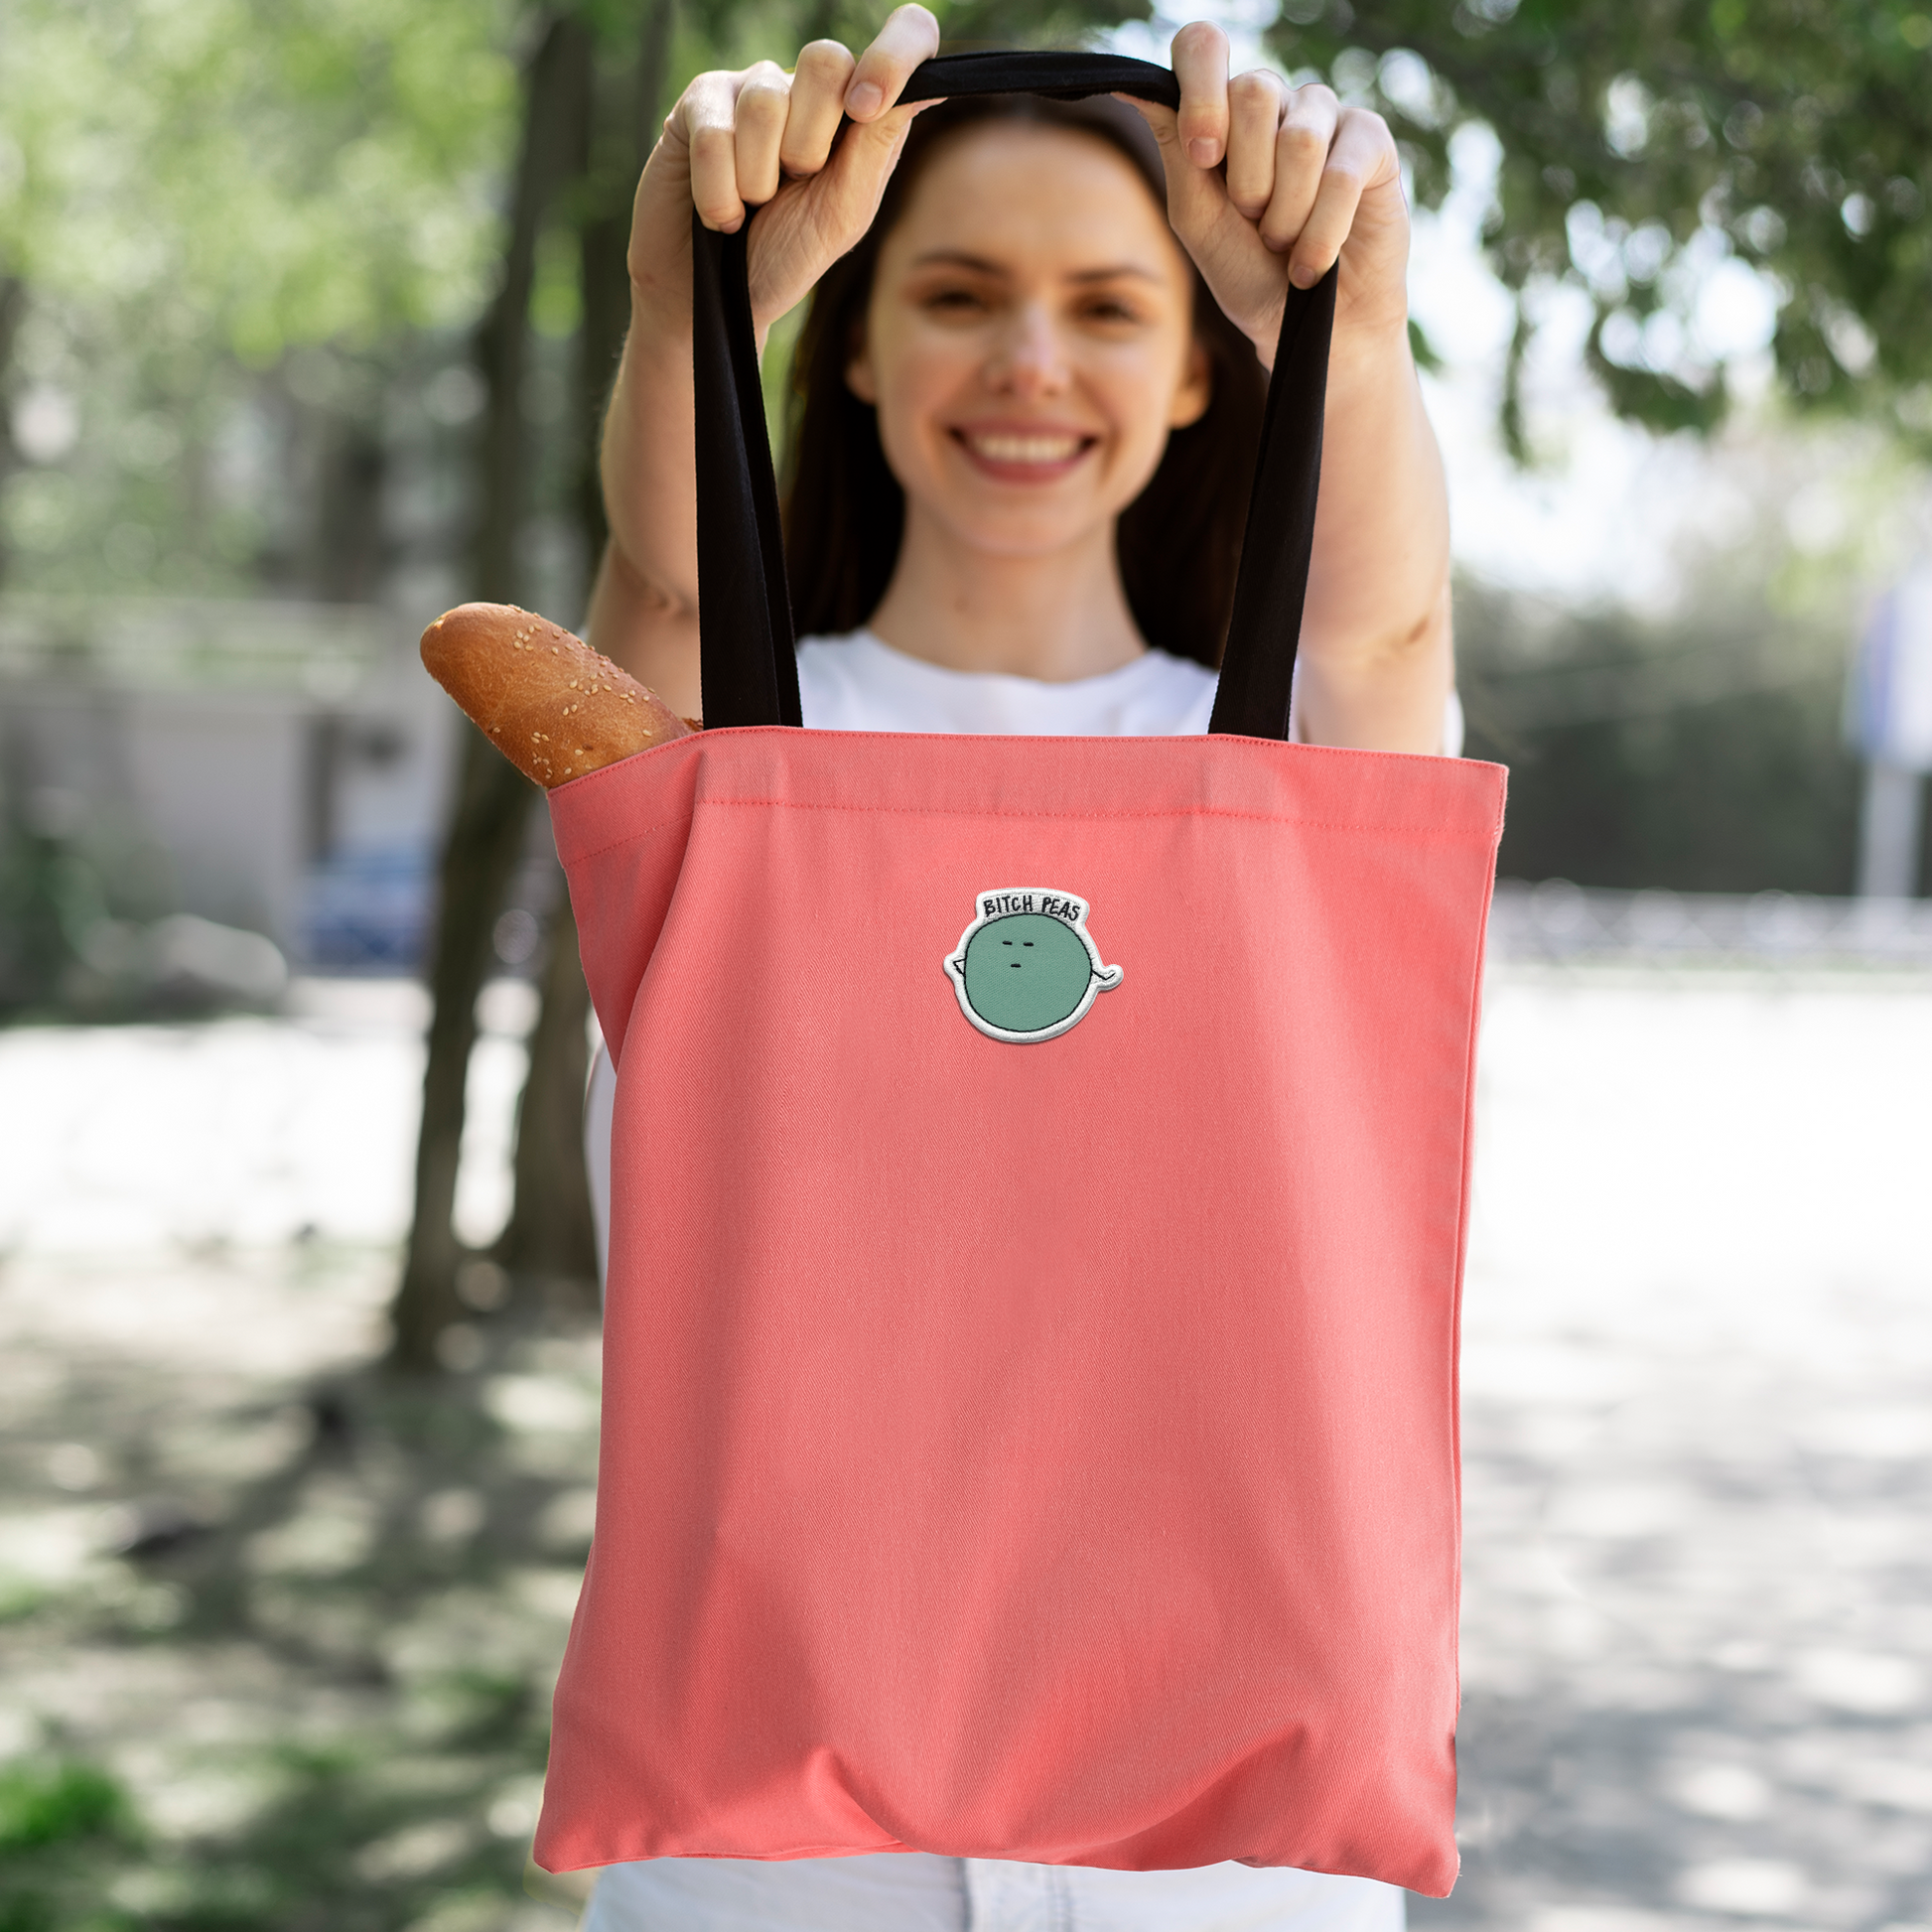 A woman demonstrating Iron On Instructions on a pink tote bag with rockdoodles Patch Dimensions, featuring the B**** Peas Patch.